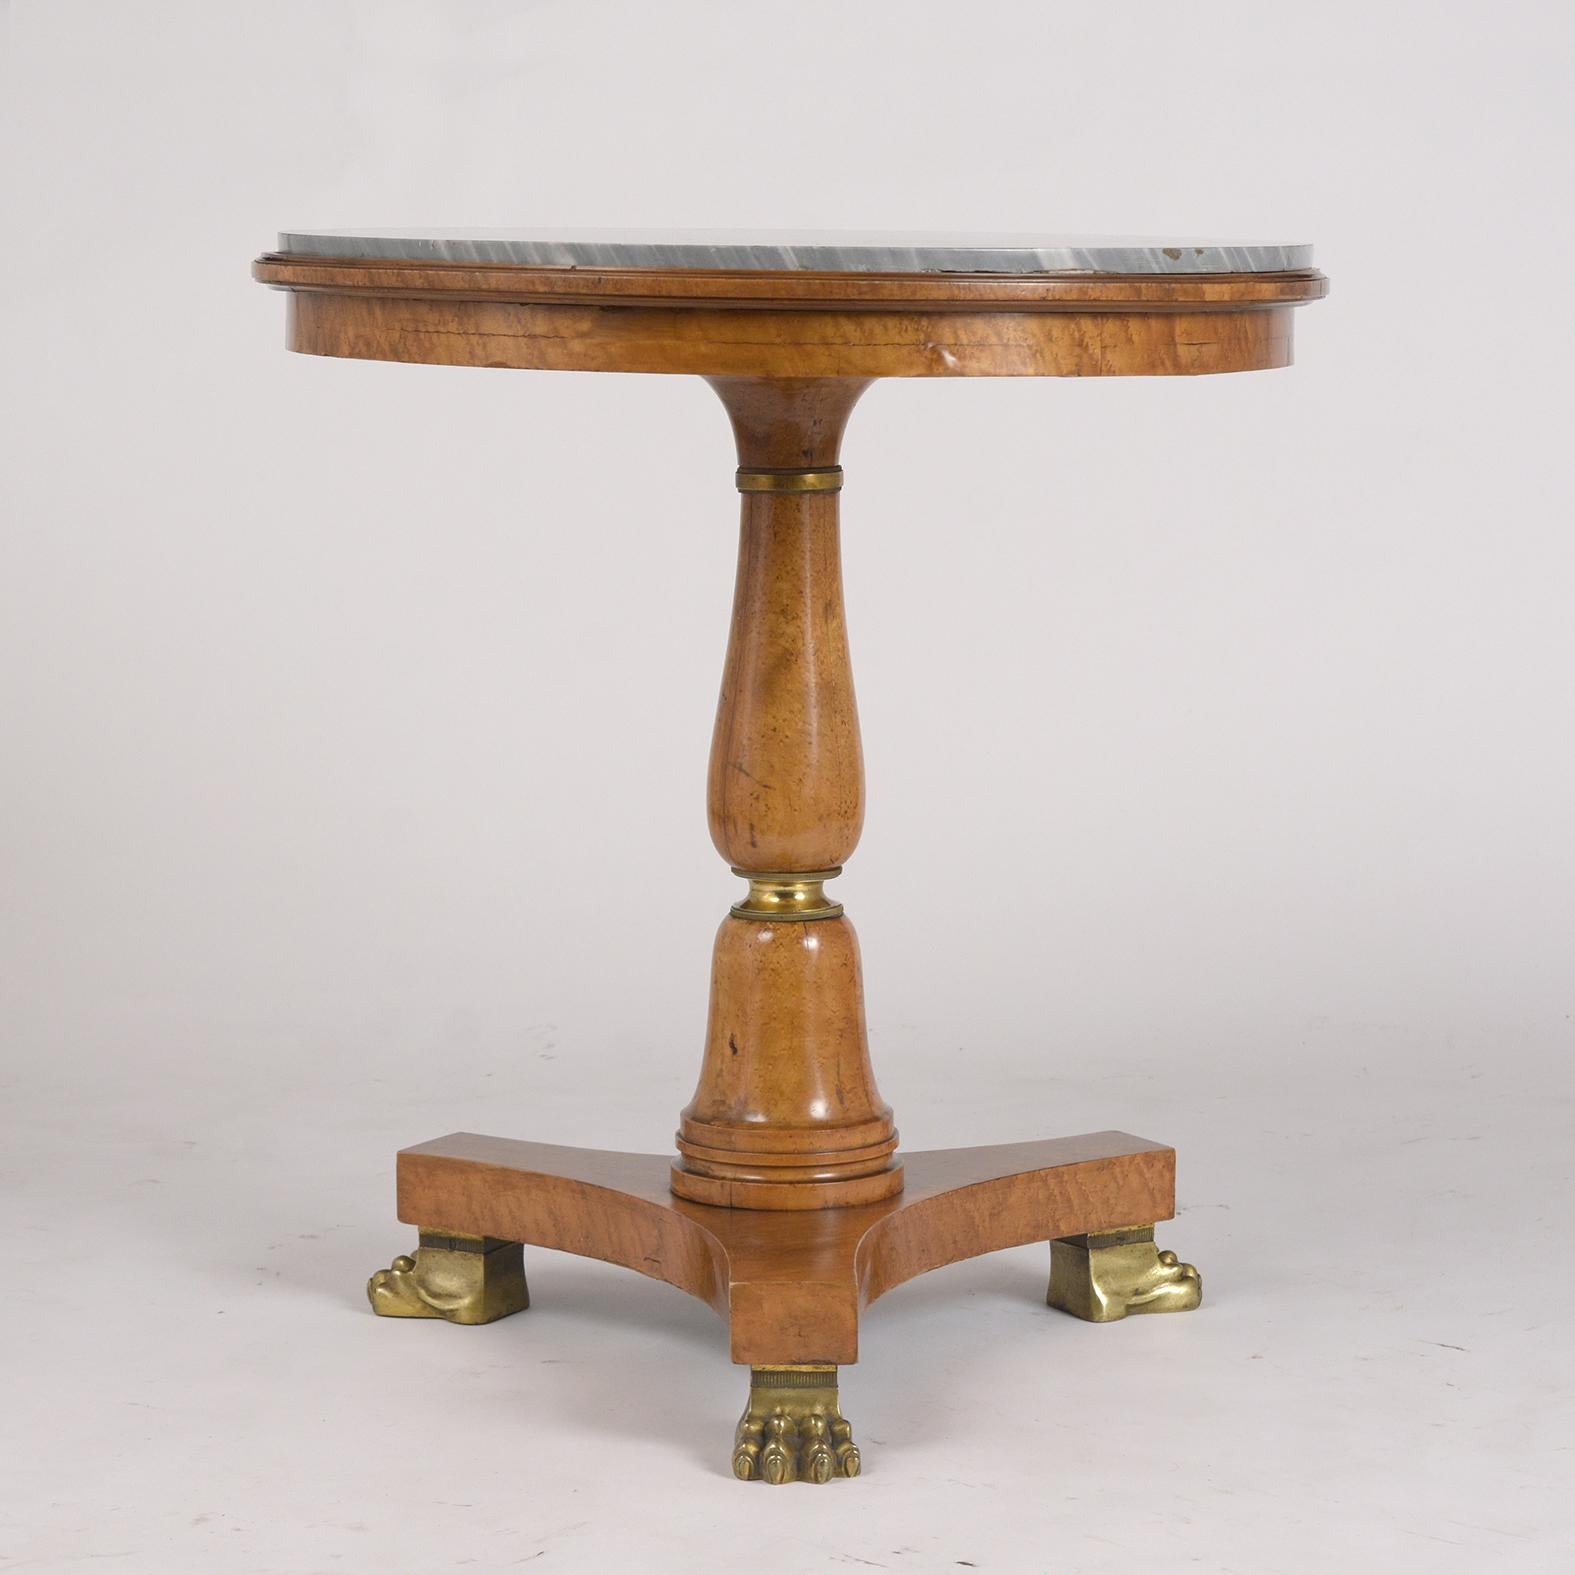 This French Empire Style Side Table is Circa 1830's and is made out of maple and birch wood combination stained in its original walnut color with waxed & polished finish. The Gueridon features the original round grey colored marble top with white